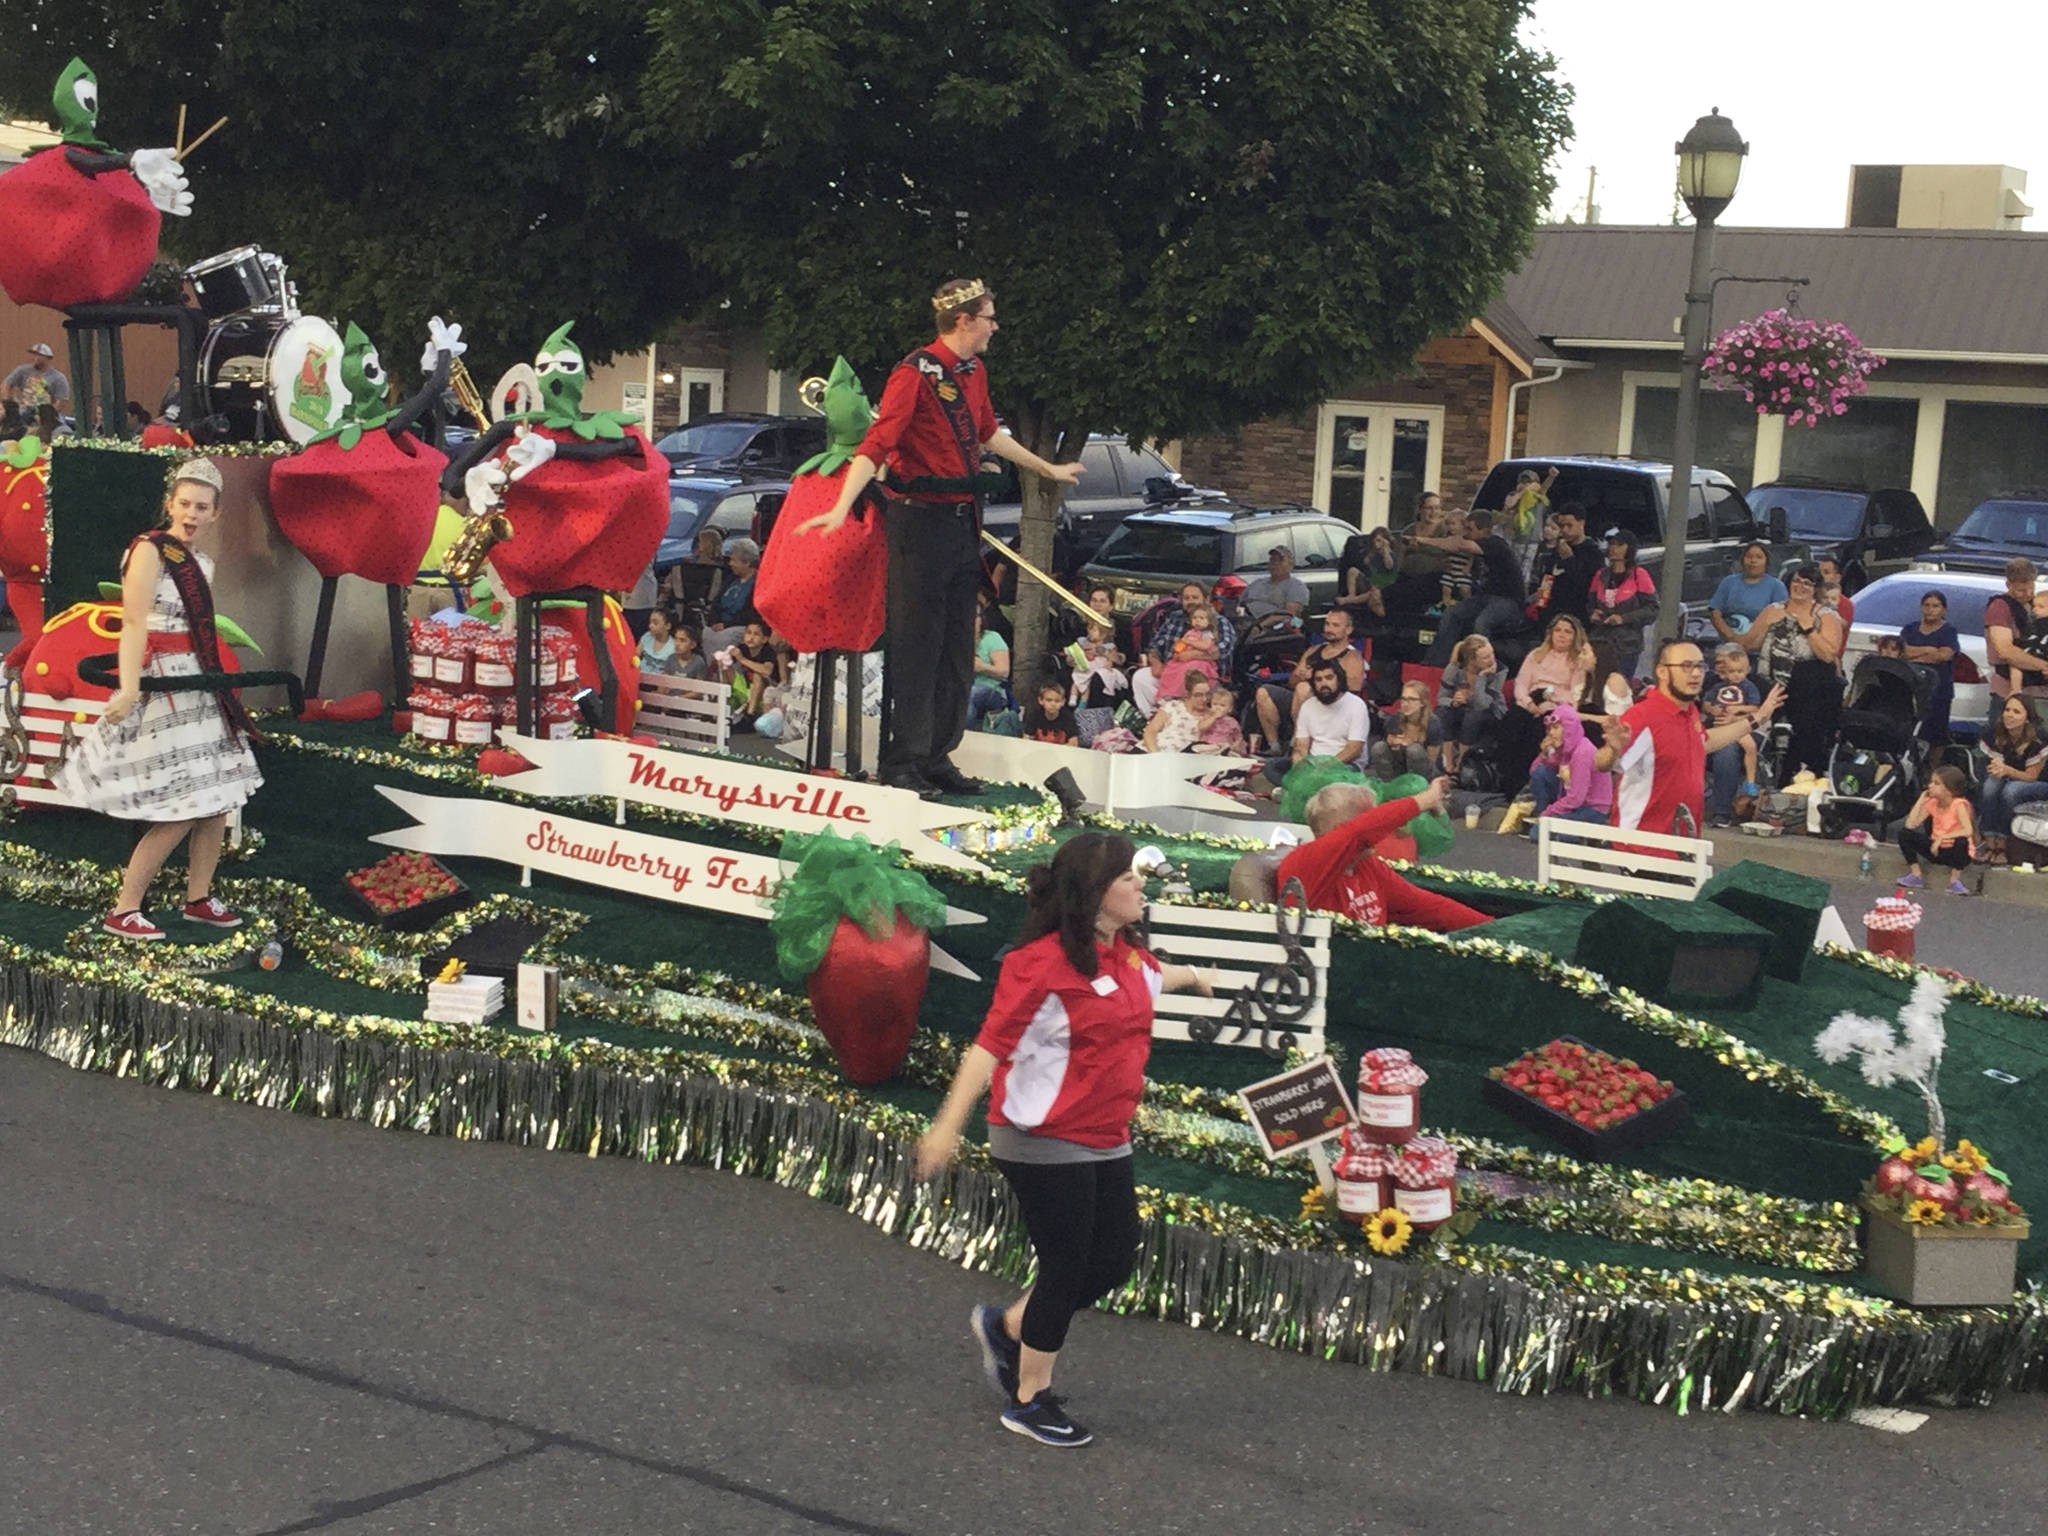 Jam-packed weeklong Strawberry Festival ends with Twilight Grand Parade (slide show)